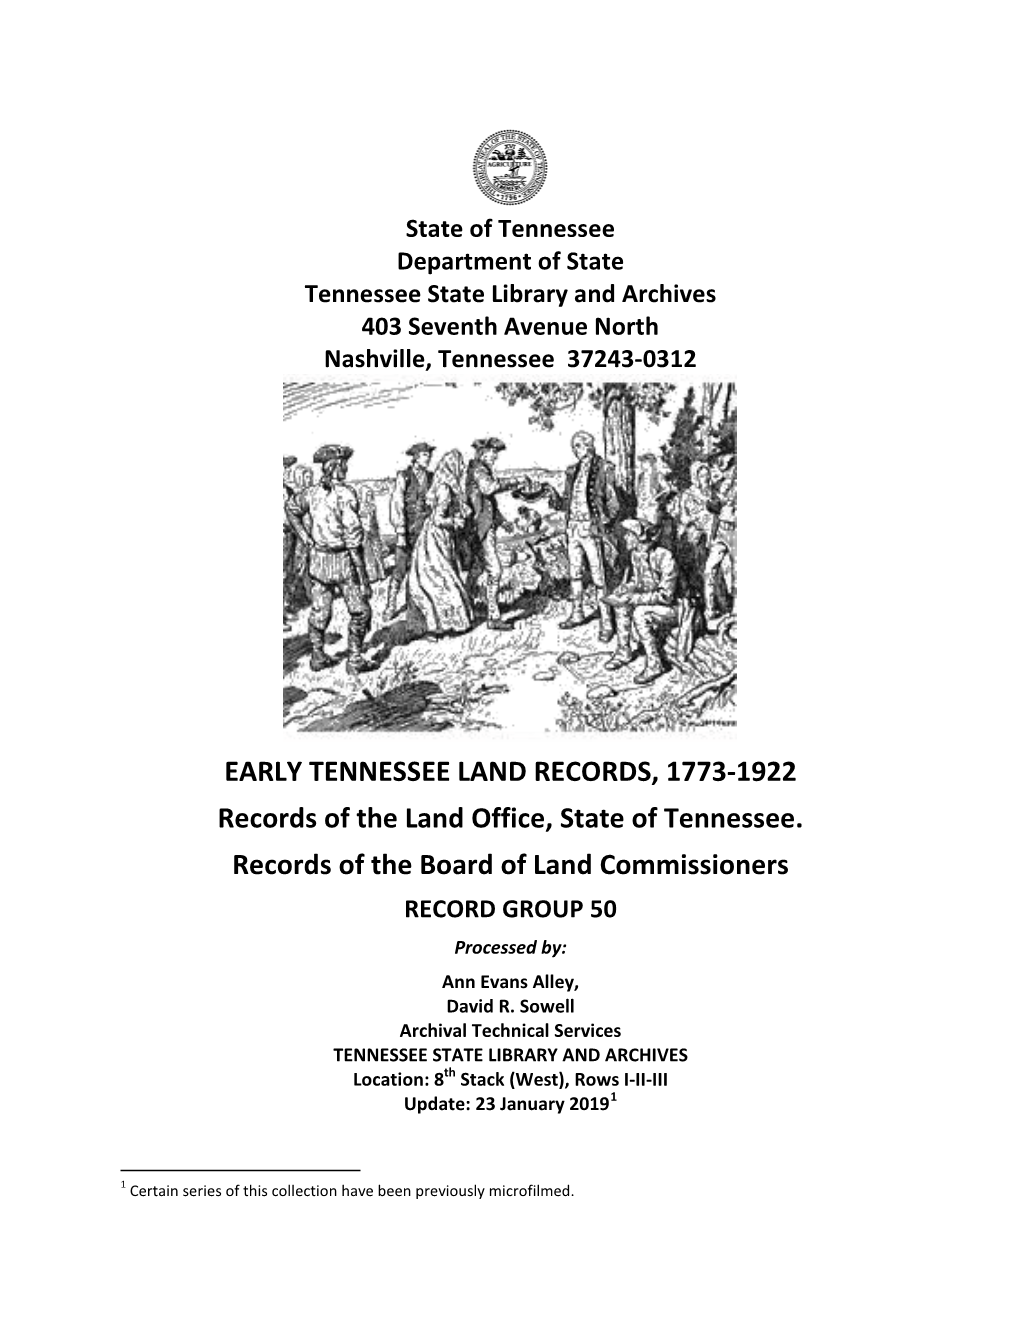 EARLY TENNESSEE LAND RECORDS, 1773-1922 Records of the Land Office, State of Tennessee